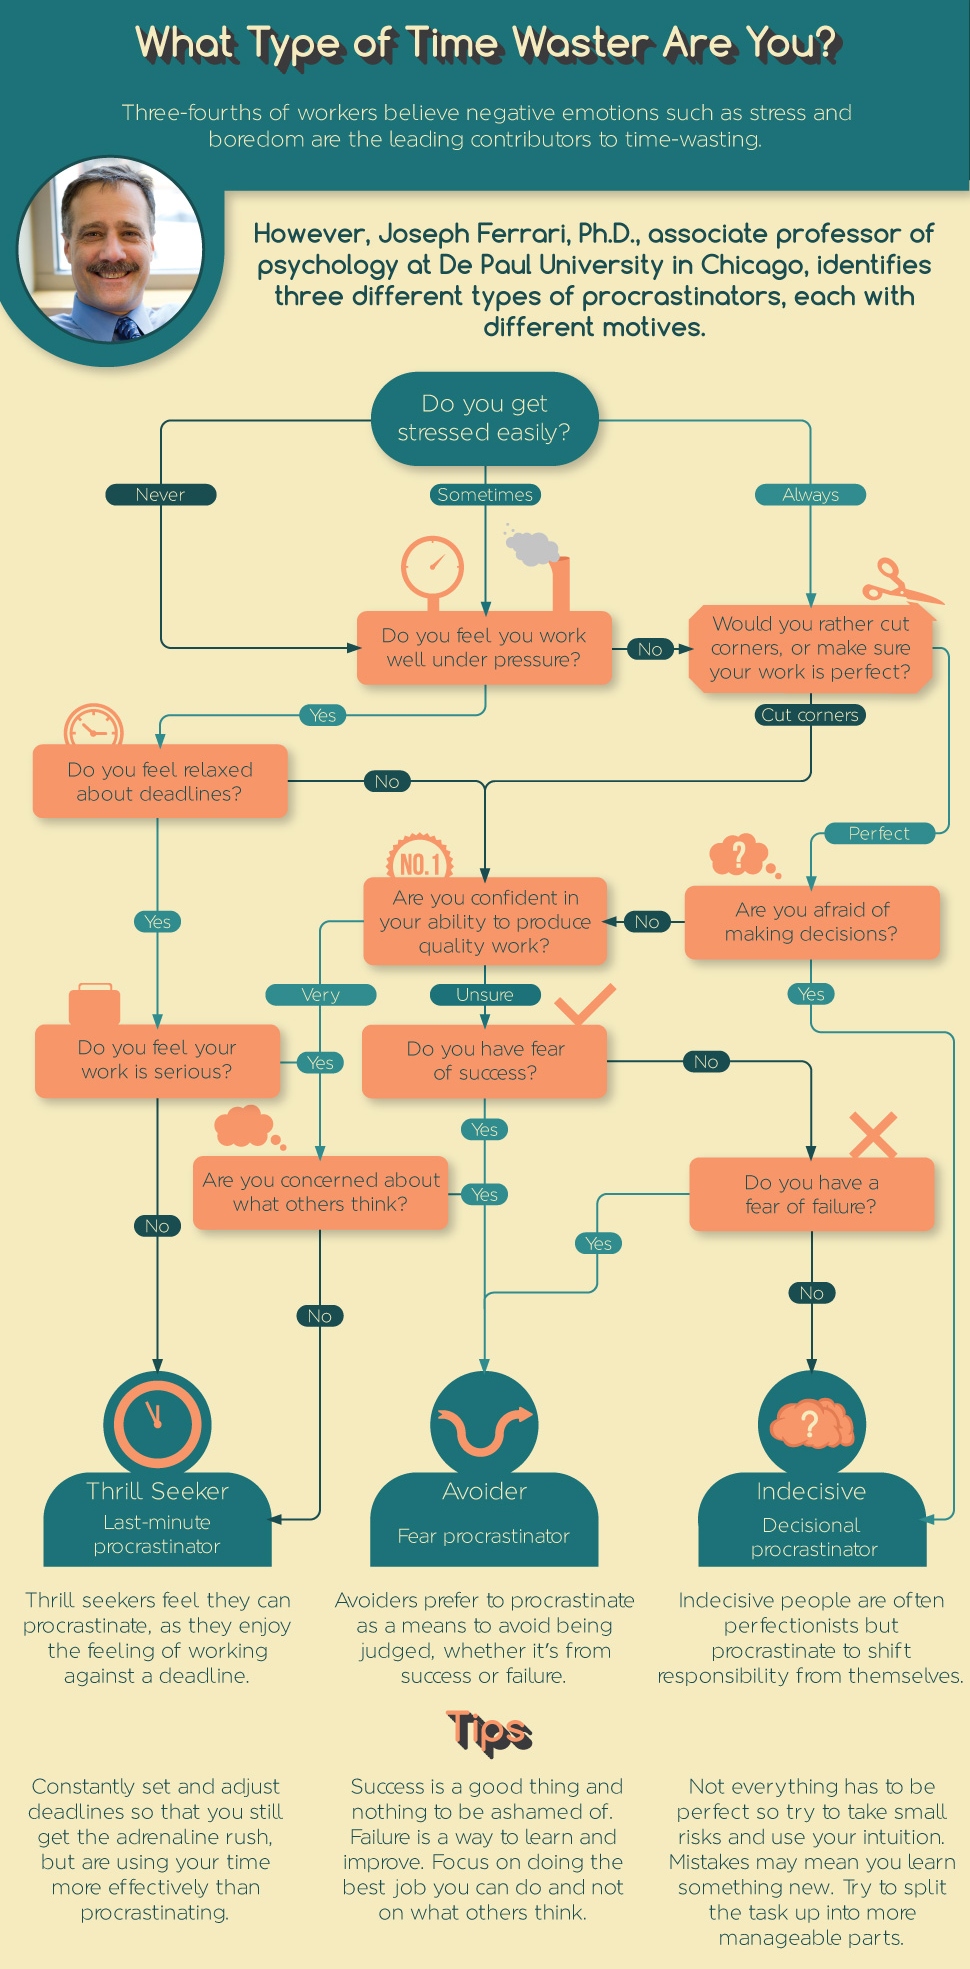 Use This Flowchart To Identify The Type Of Procrastinator You Are